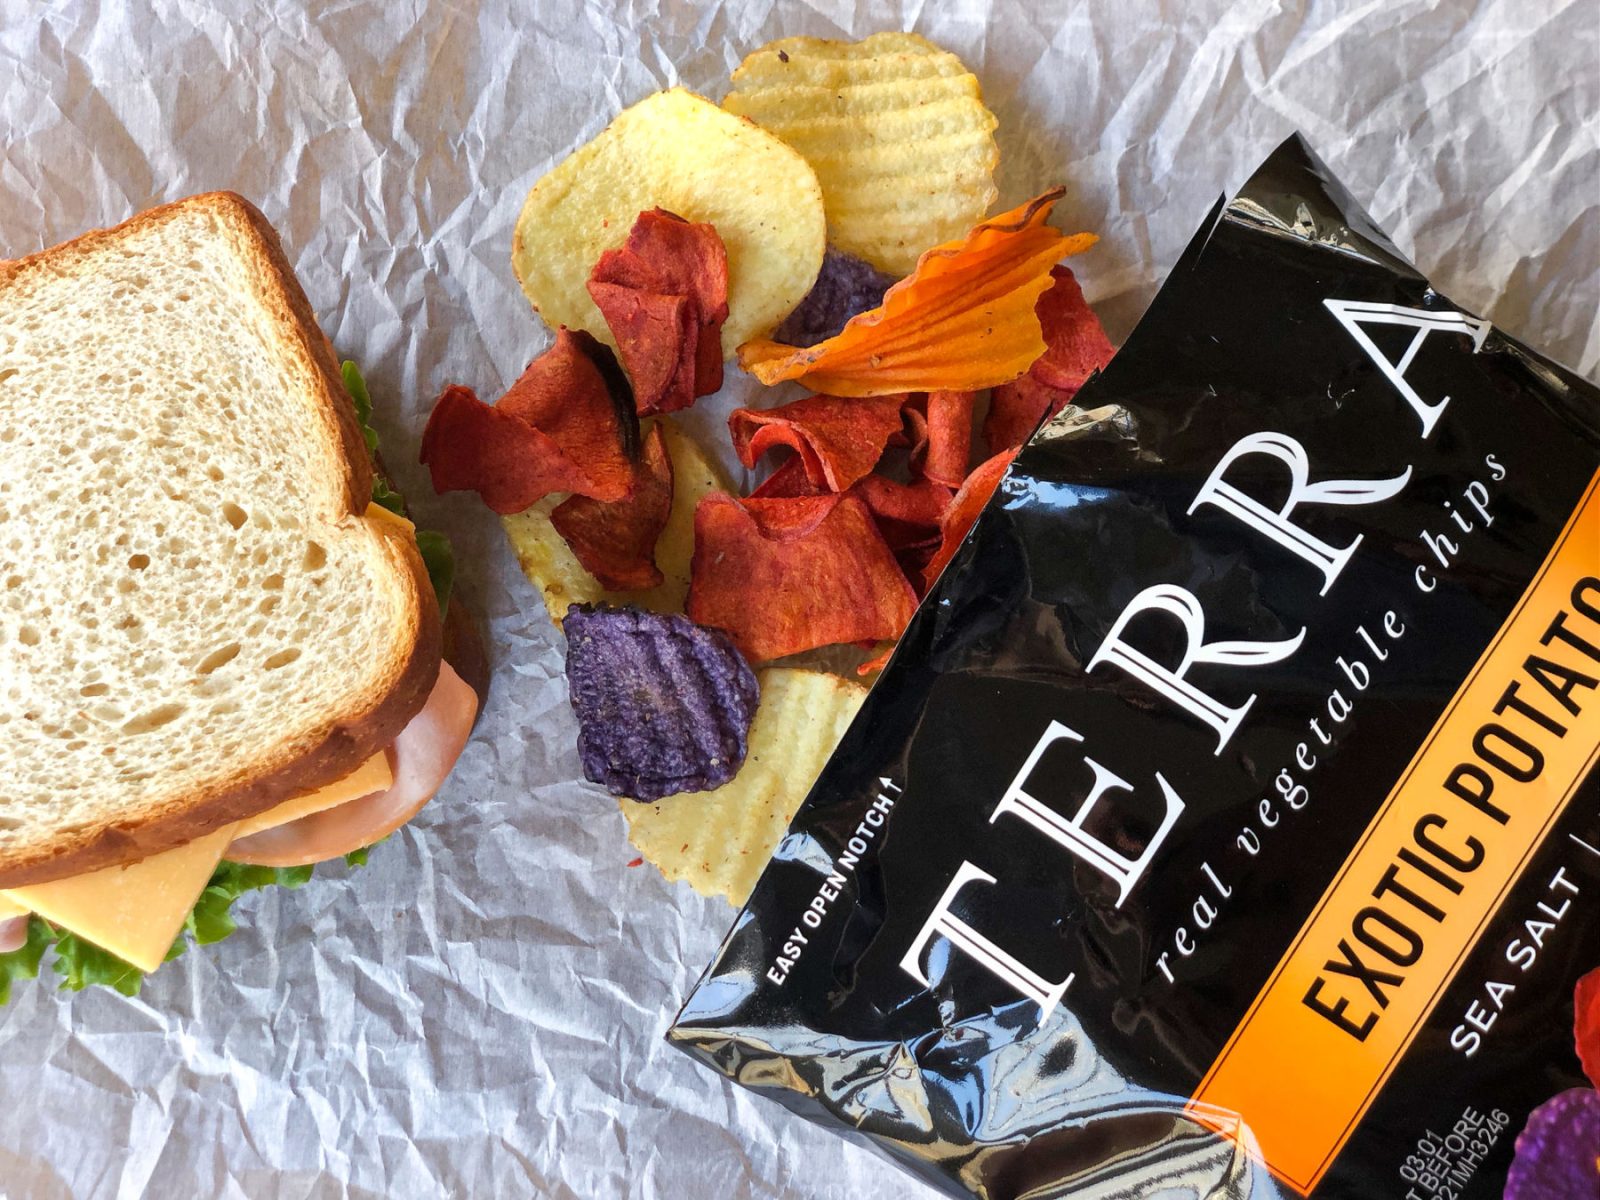 Delicious Terra Chips Are On Sale Now At Publix